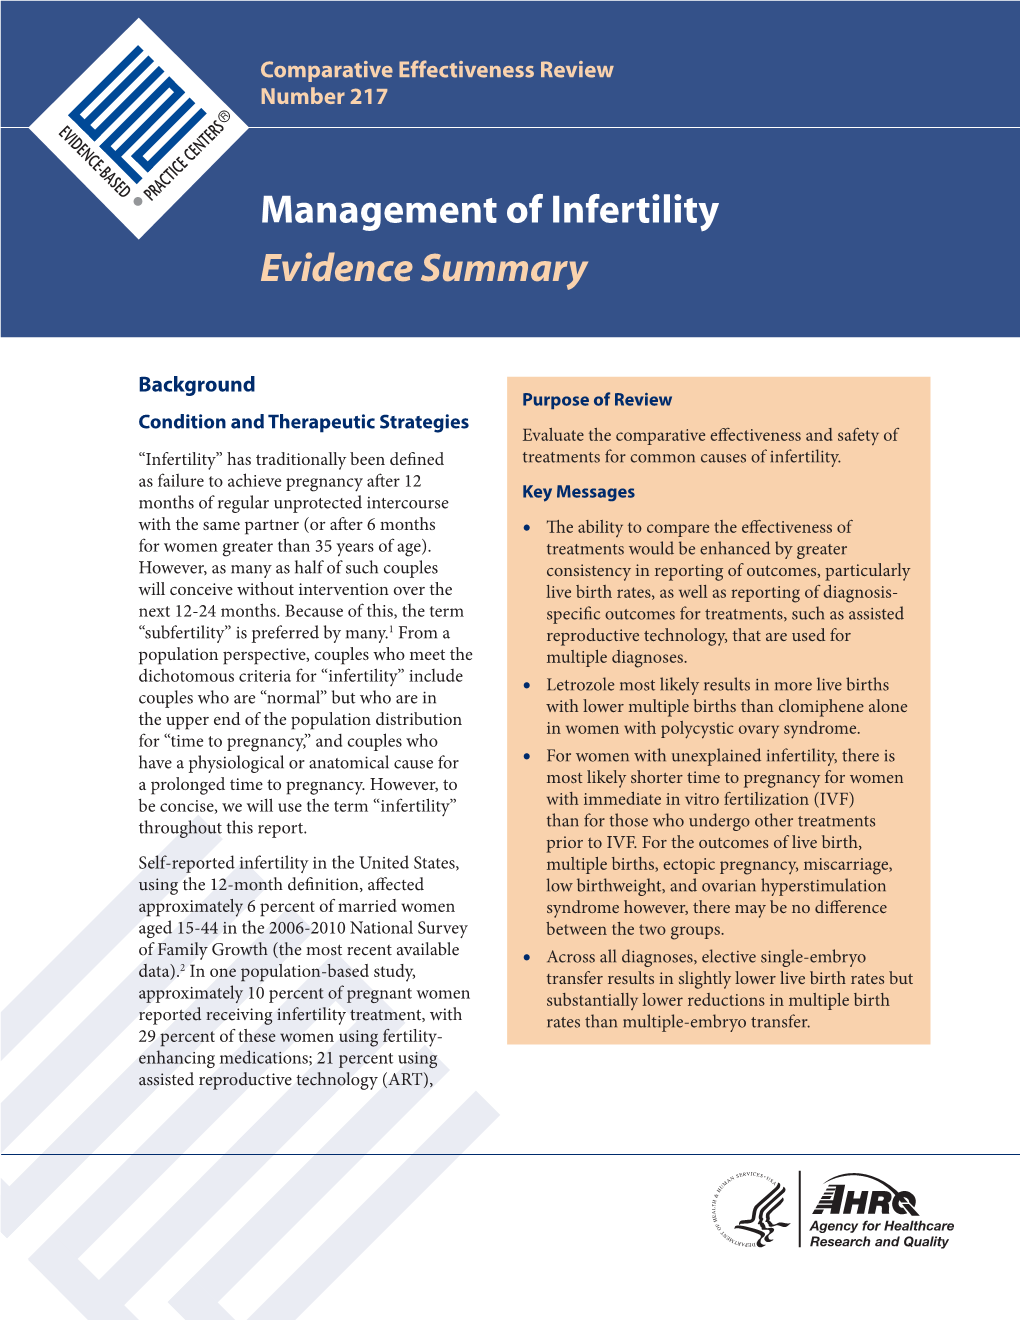 CER 217 Management of Infertility Evidence Summary